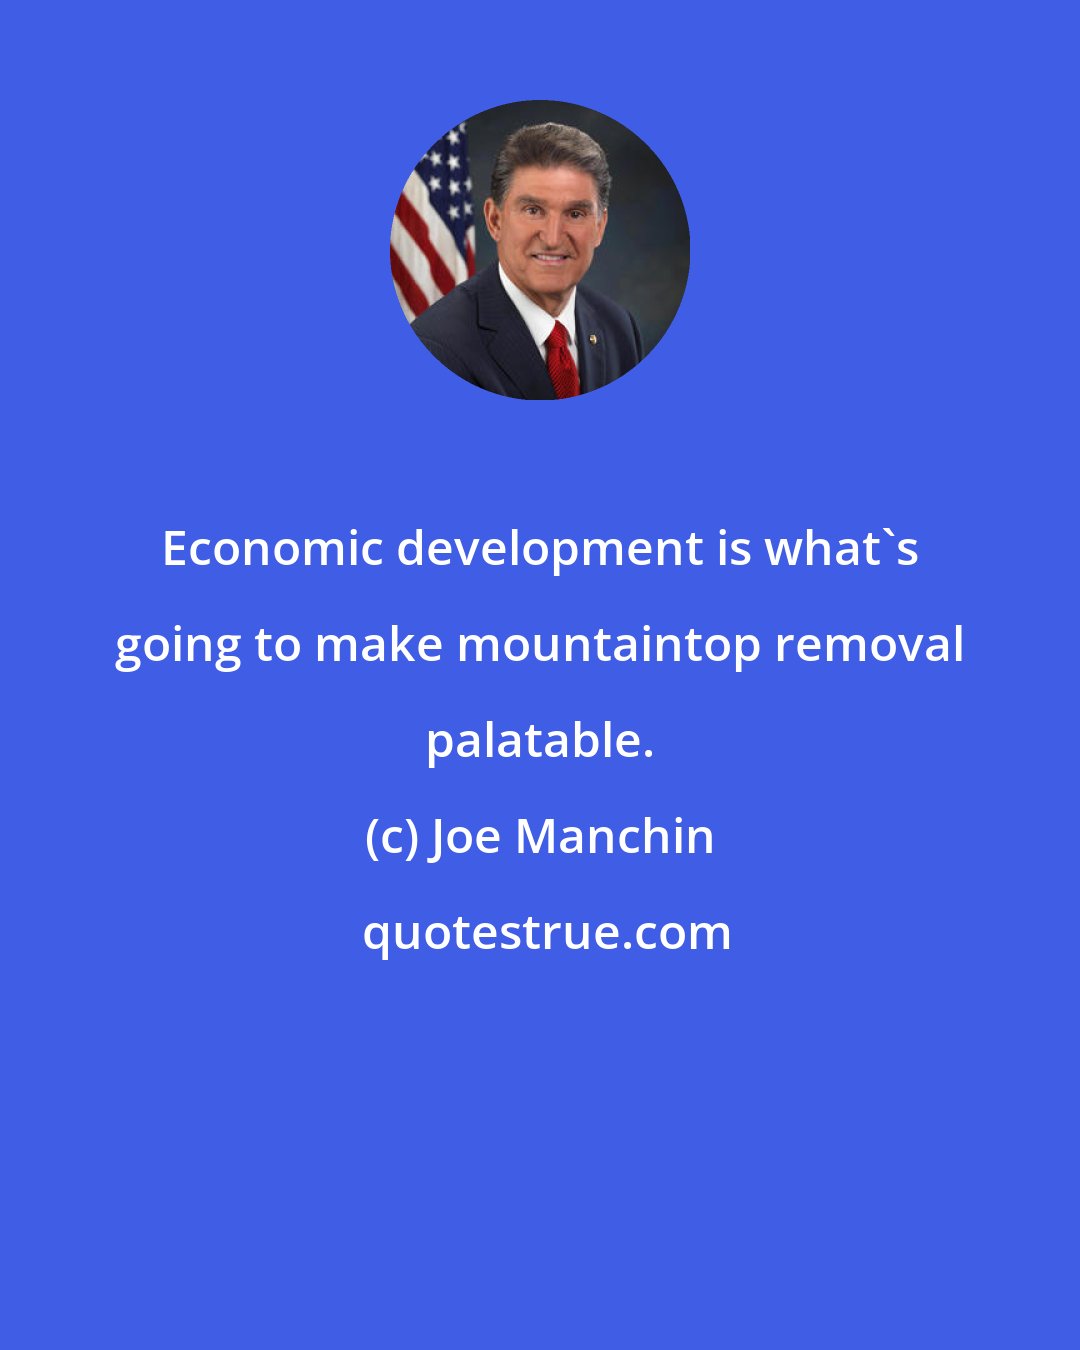 Joe Manchin: Economic development is what's going to make mountaintop removal palatable.